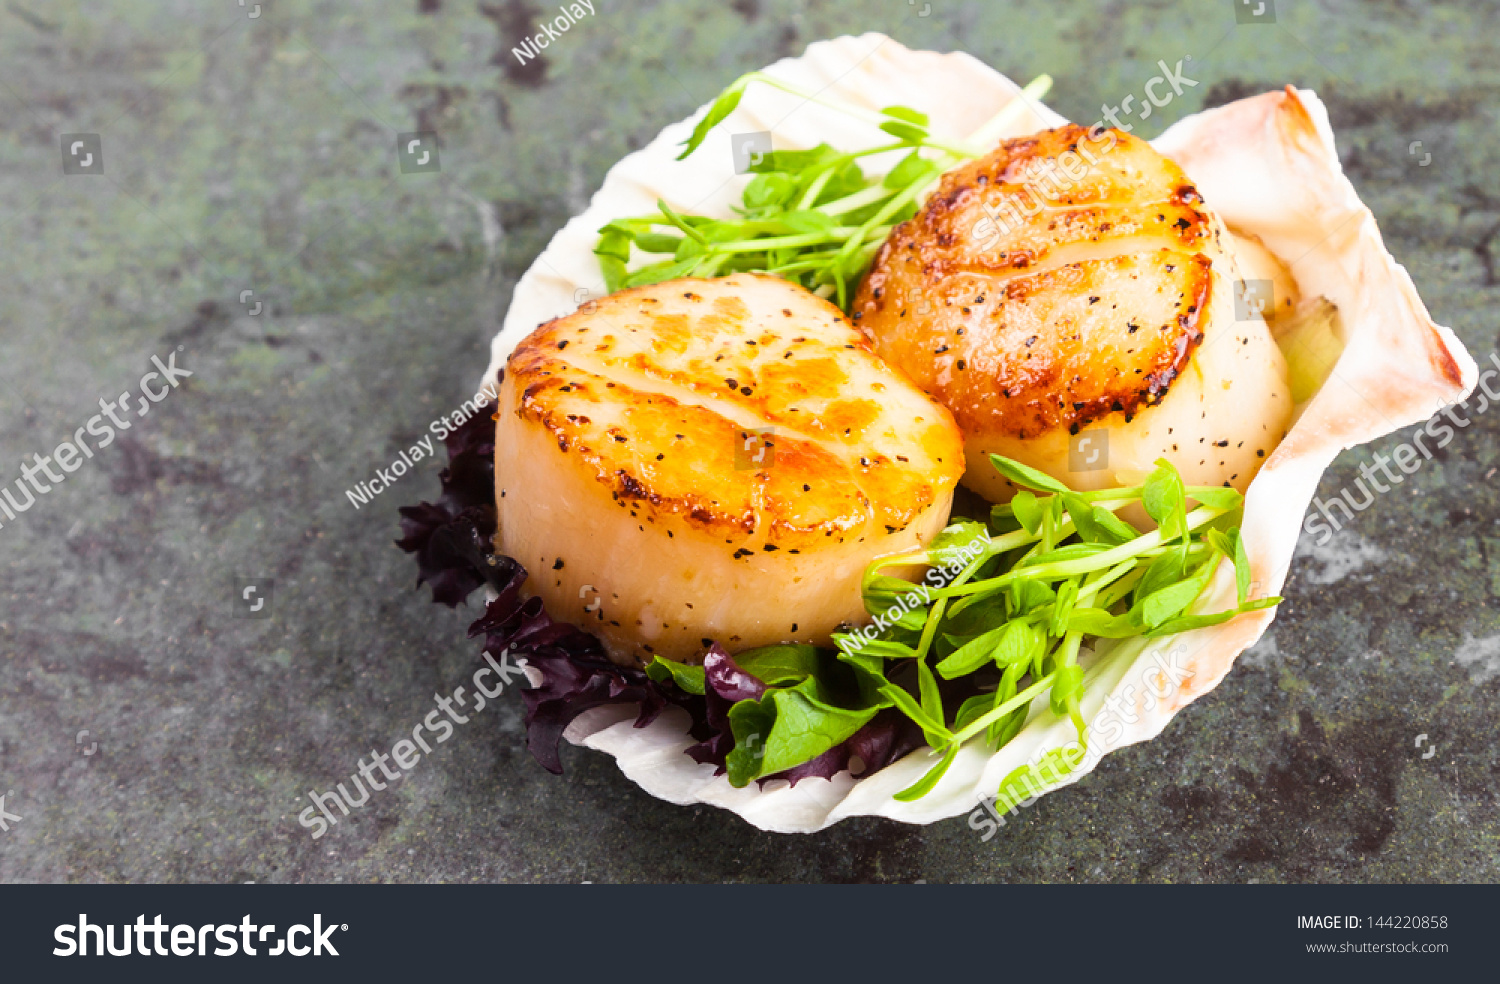 Pan seared scallops with garnish on a stone plate.. #144220858